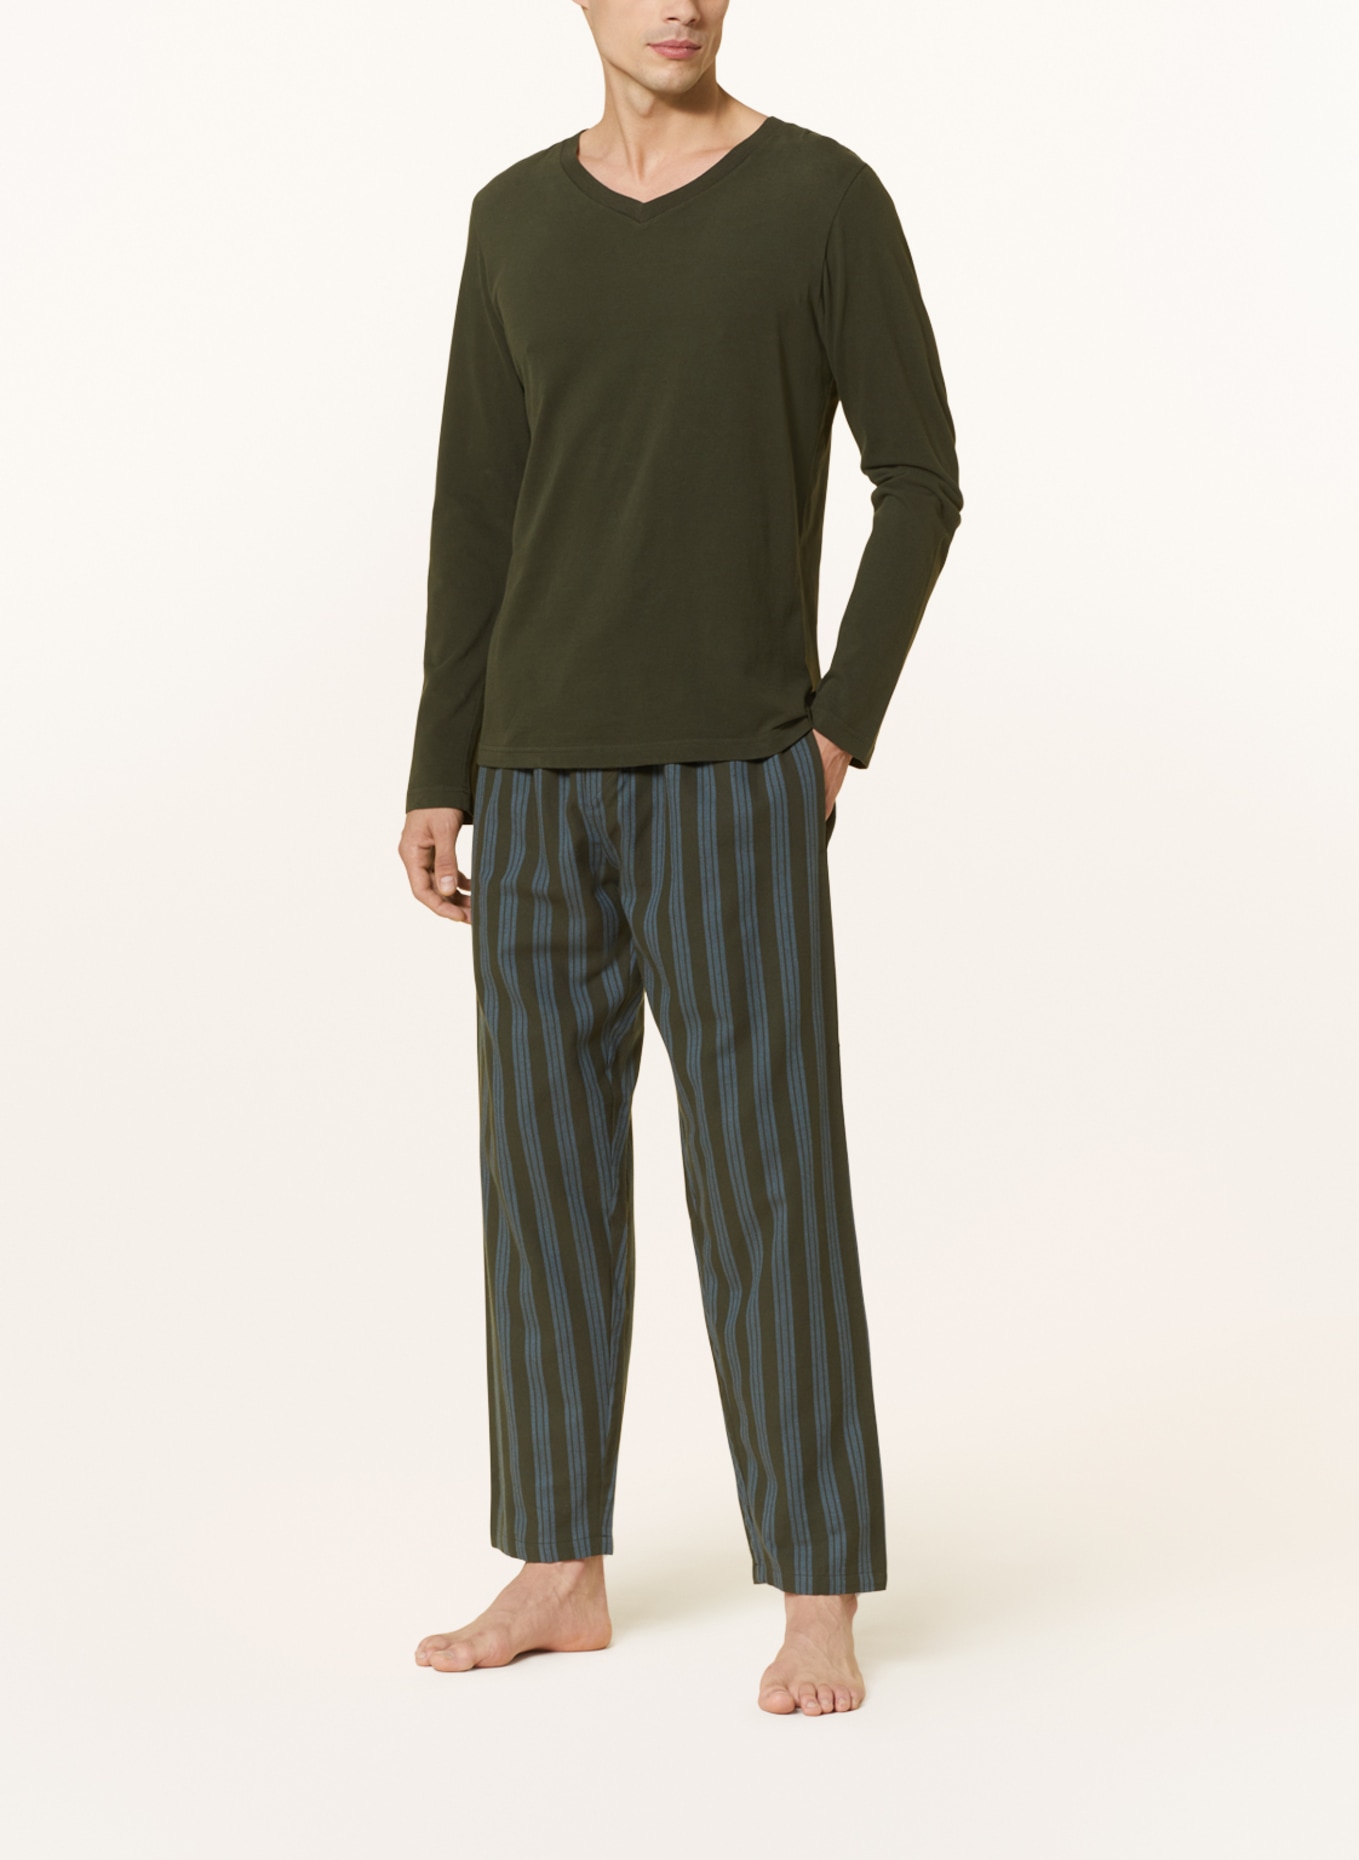 SCHIESSER Pajama pants MIX+RELAX, Color: OLIVE/ LIGHT BLUE (Image 2)